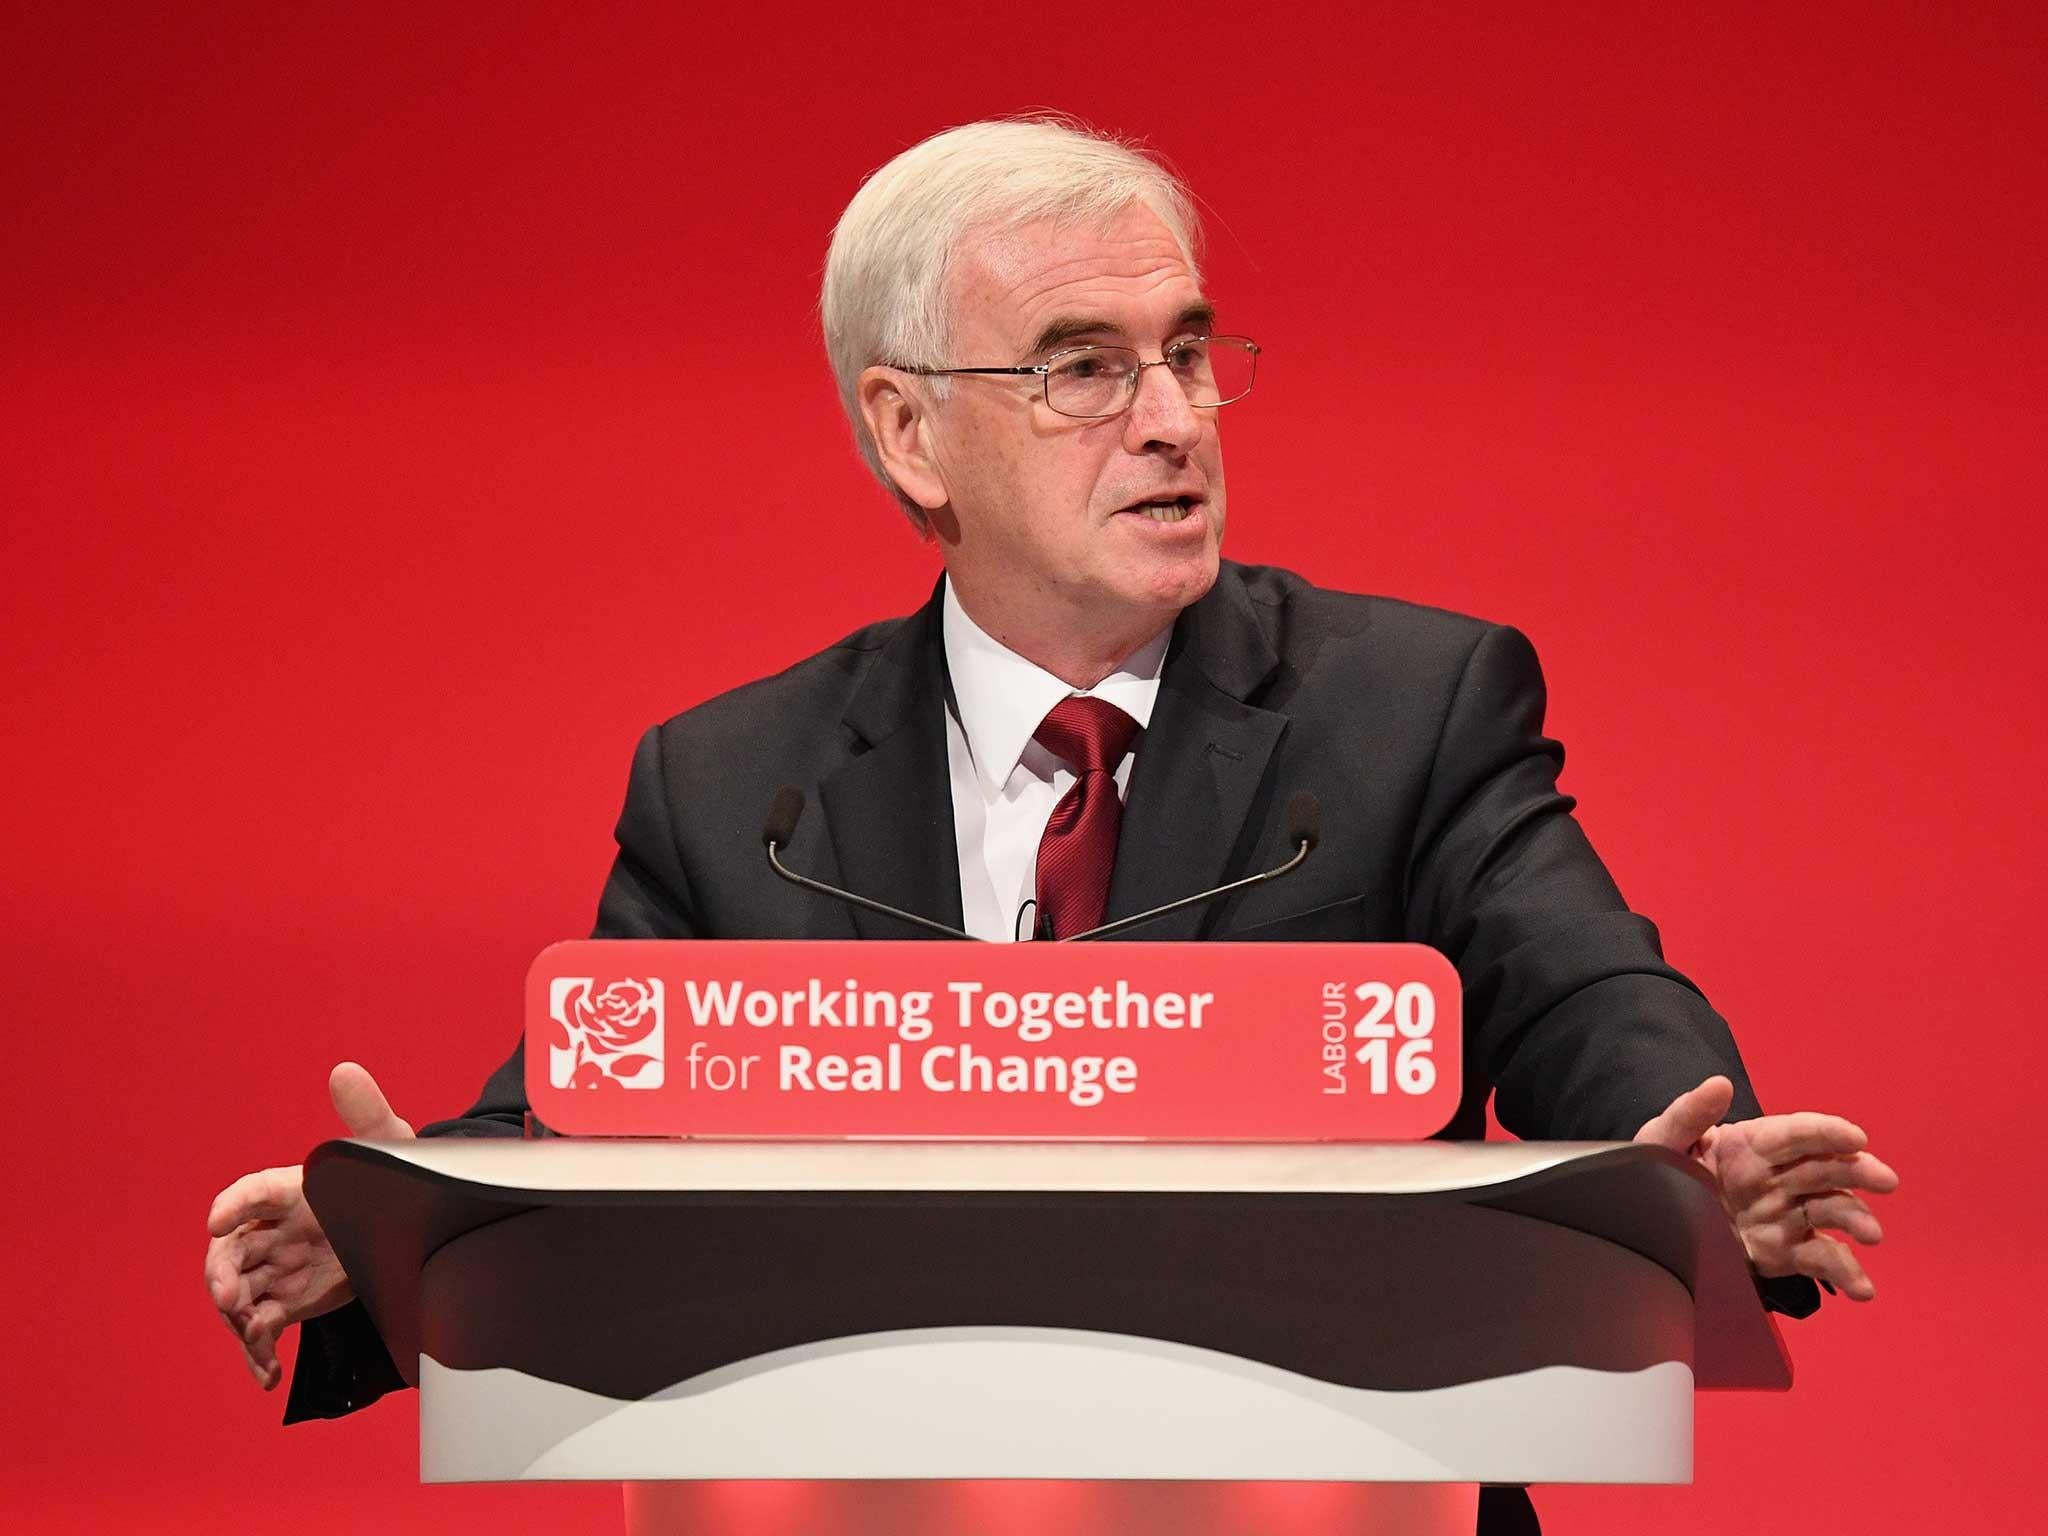 Labour MPs warned their shadow Chancellor was adopting a nationalistic tone reminiscent of Ukip's position over Europe